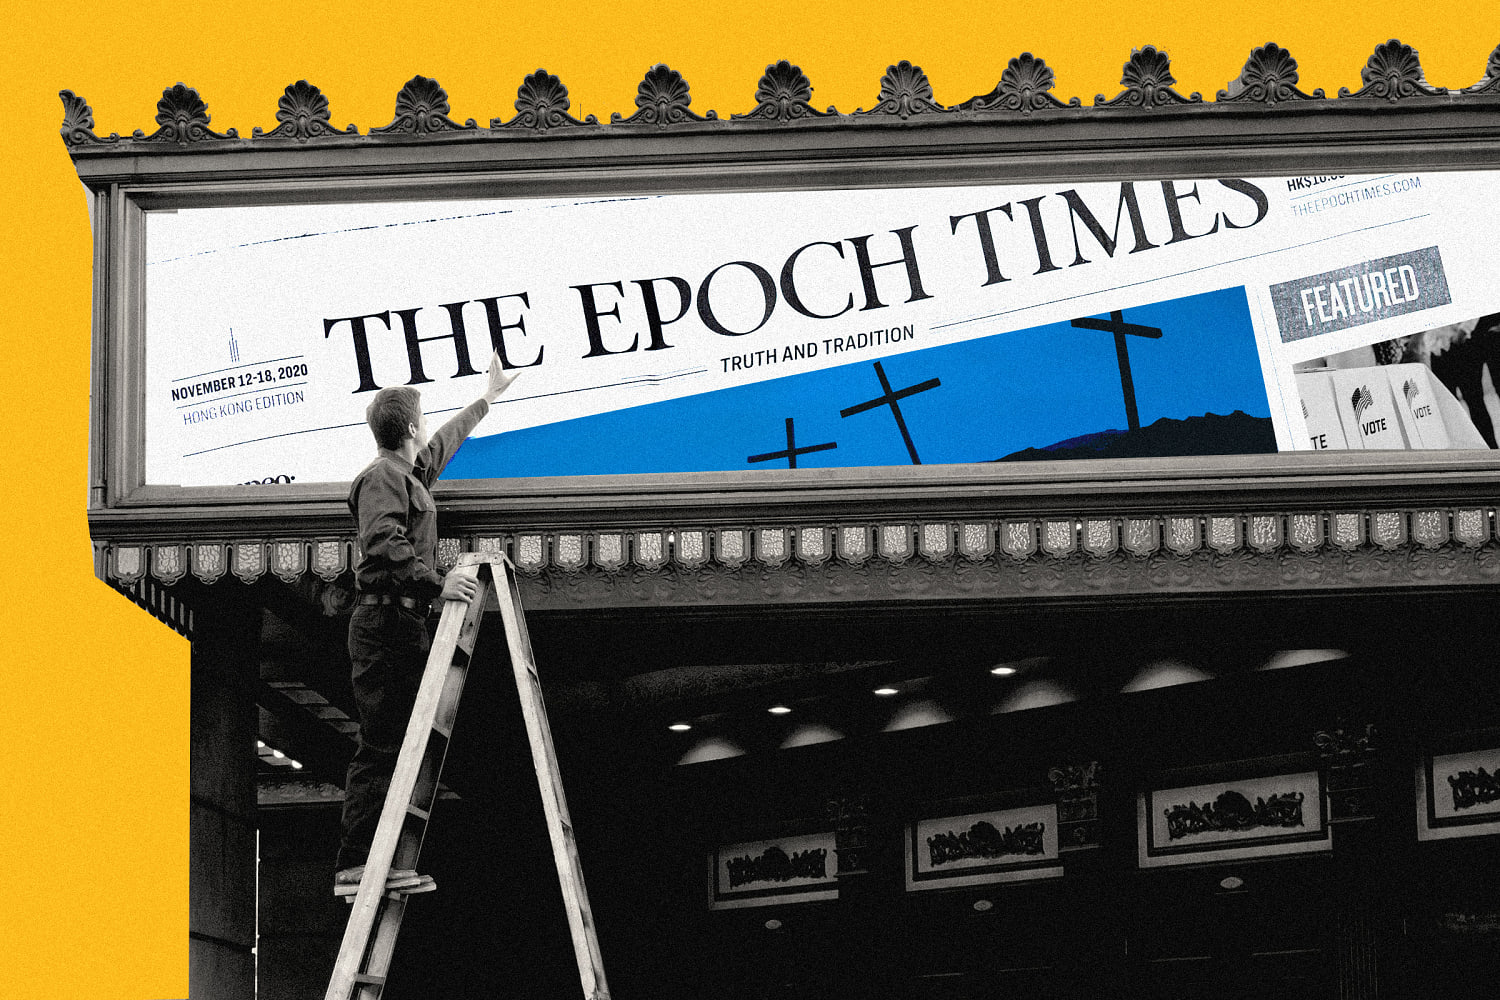 Epoch Times, the conspiratorial pro-Trump news outlet, is looking to conquer Hollywood